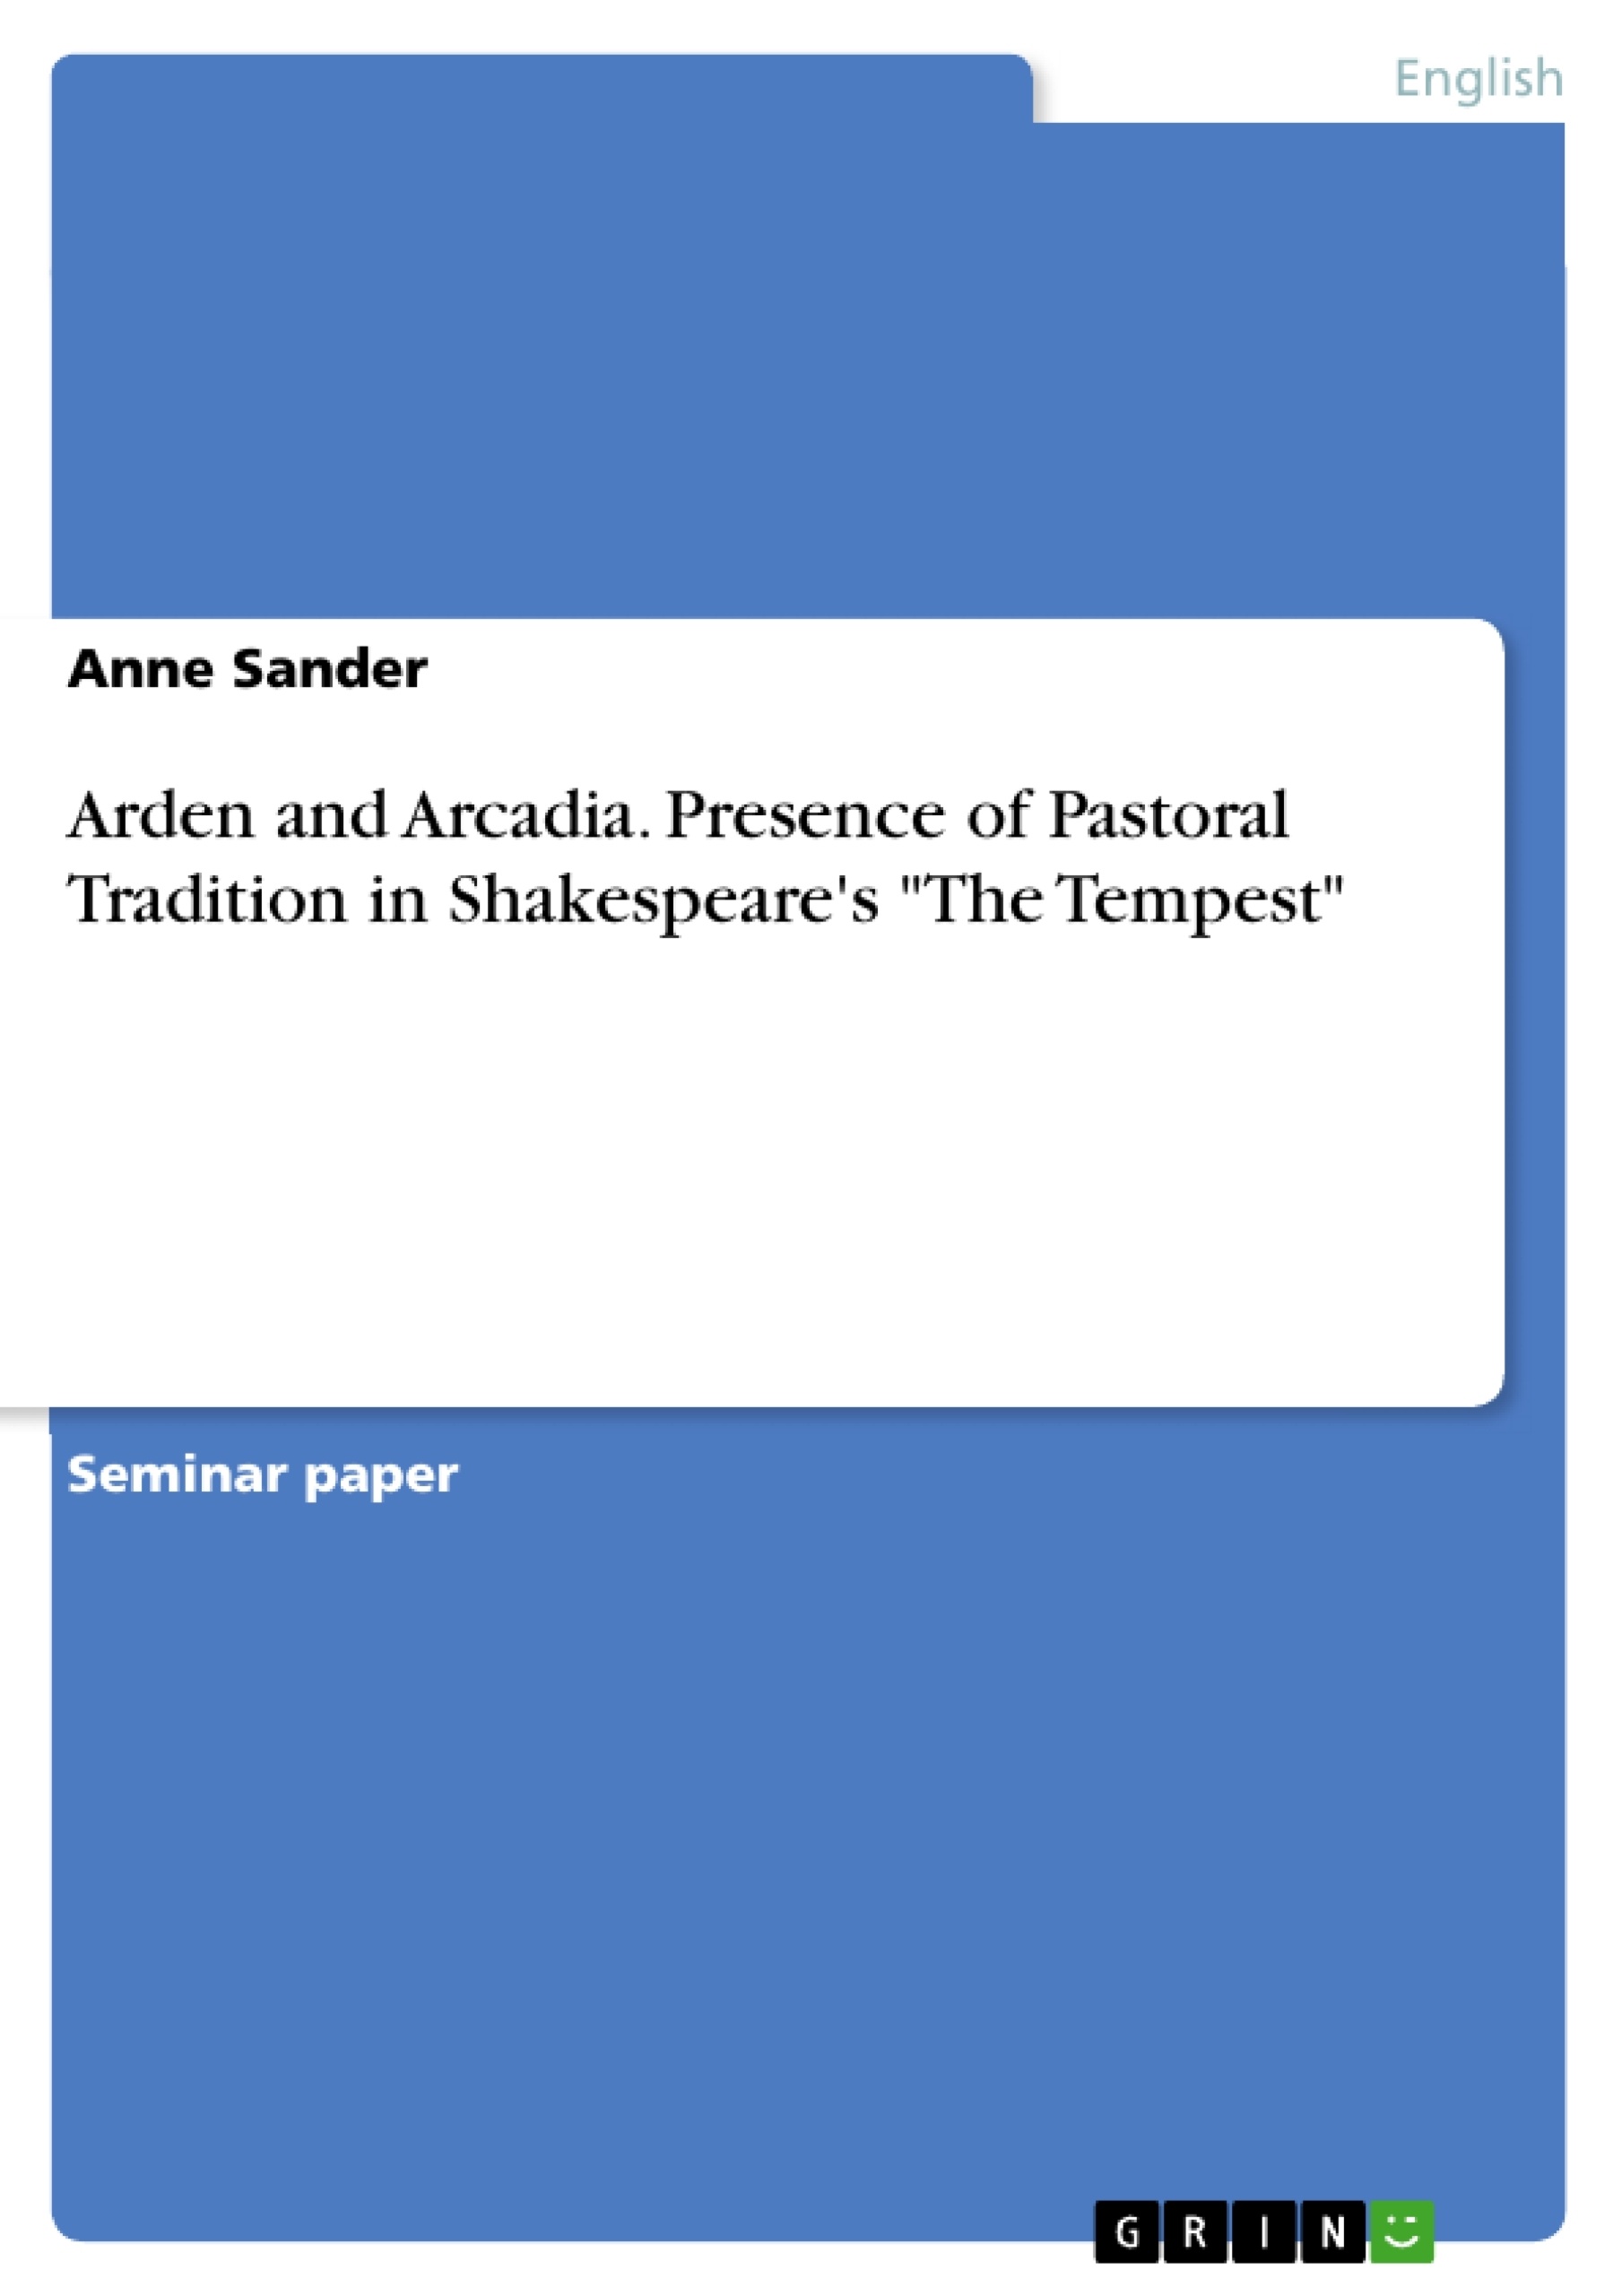 Titre: Arden and Arcadia. Presence of Pastoral Tradition in Shakespeare's "The Tempest"